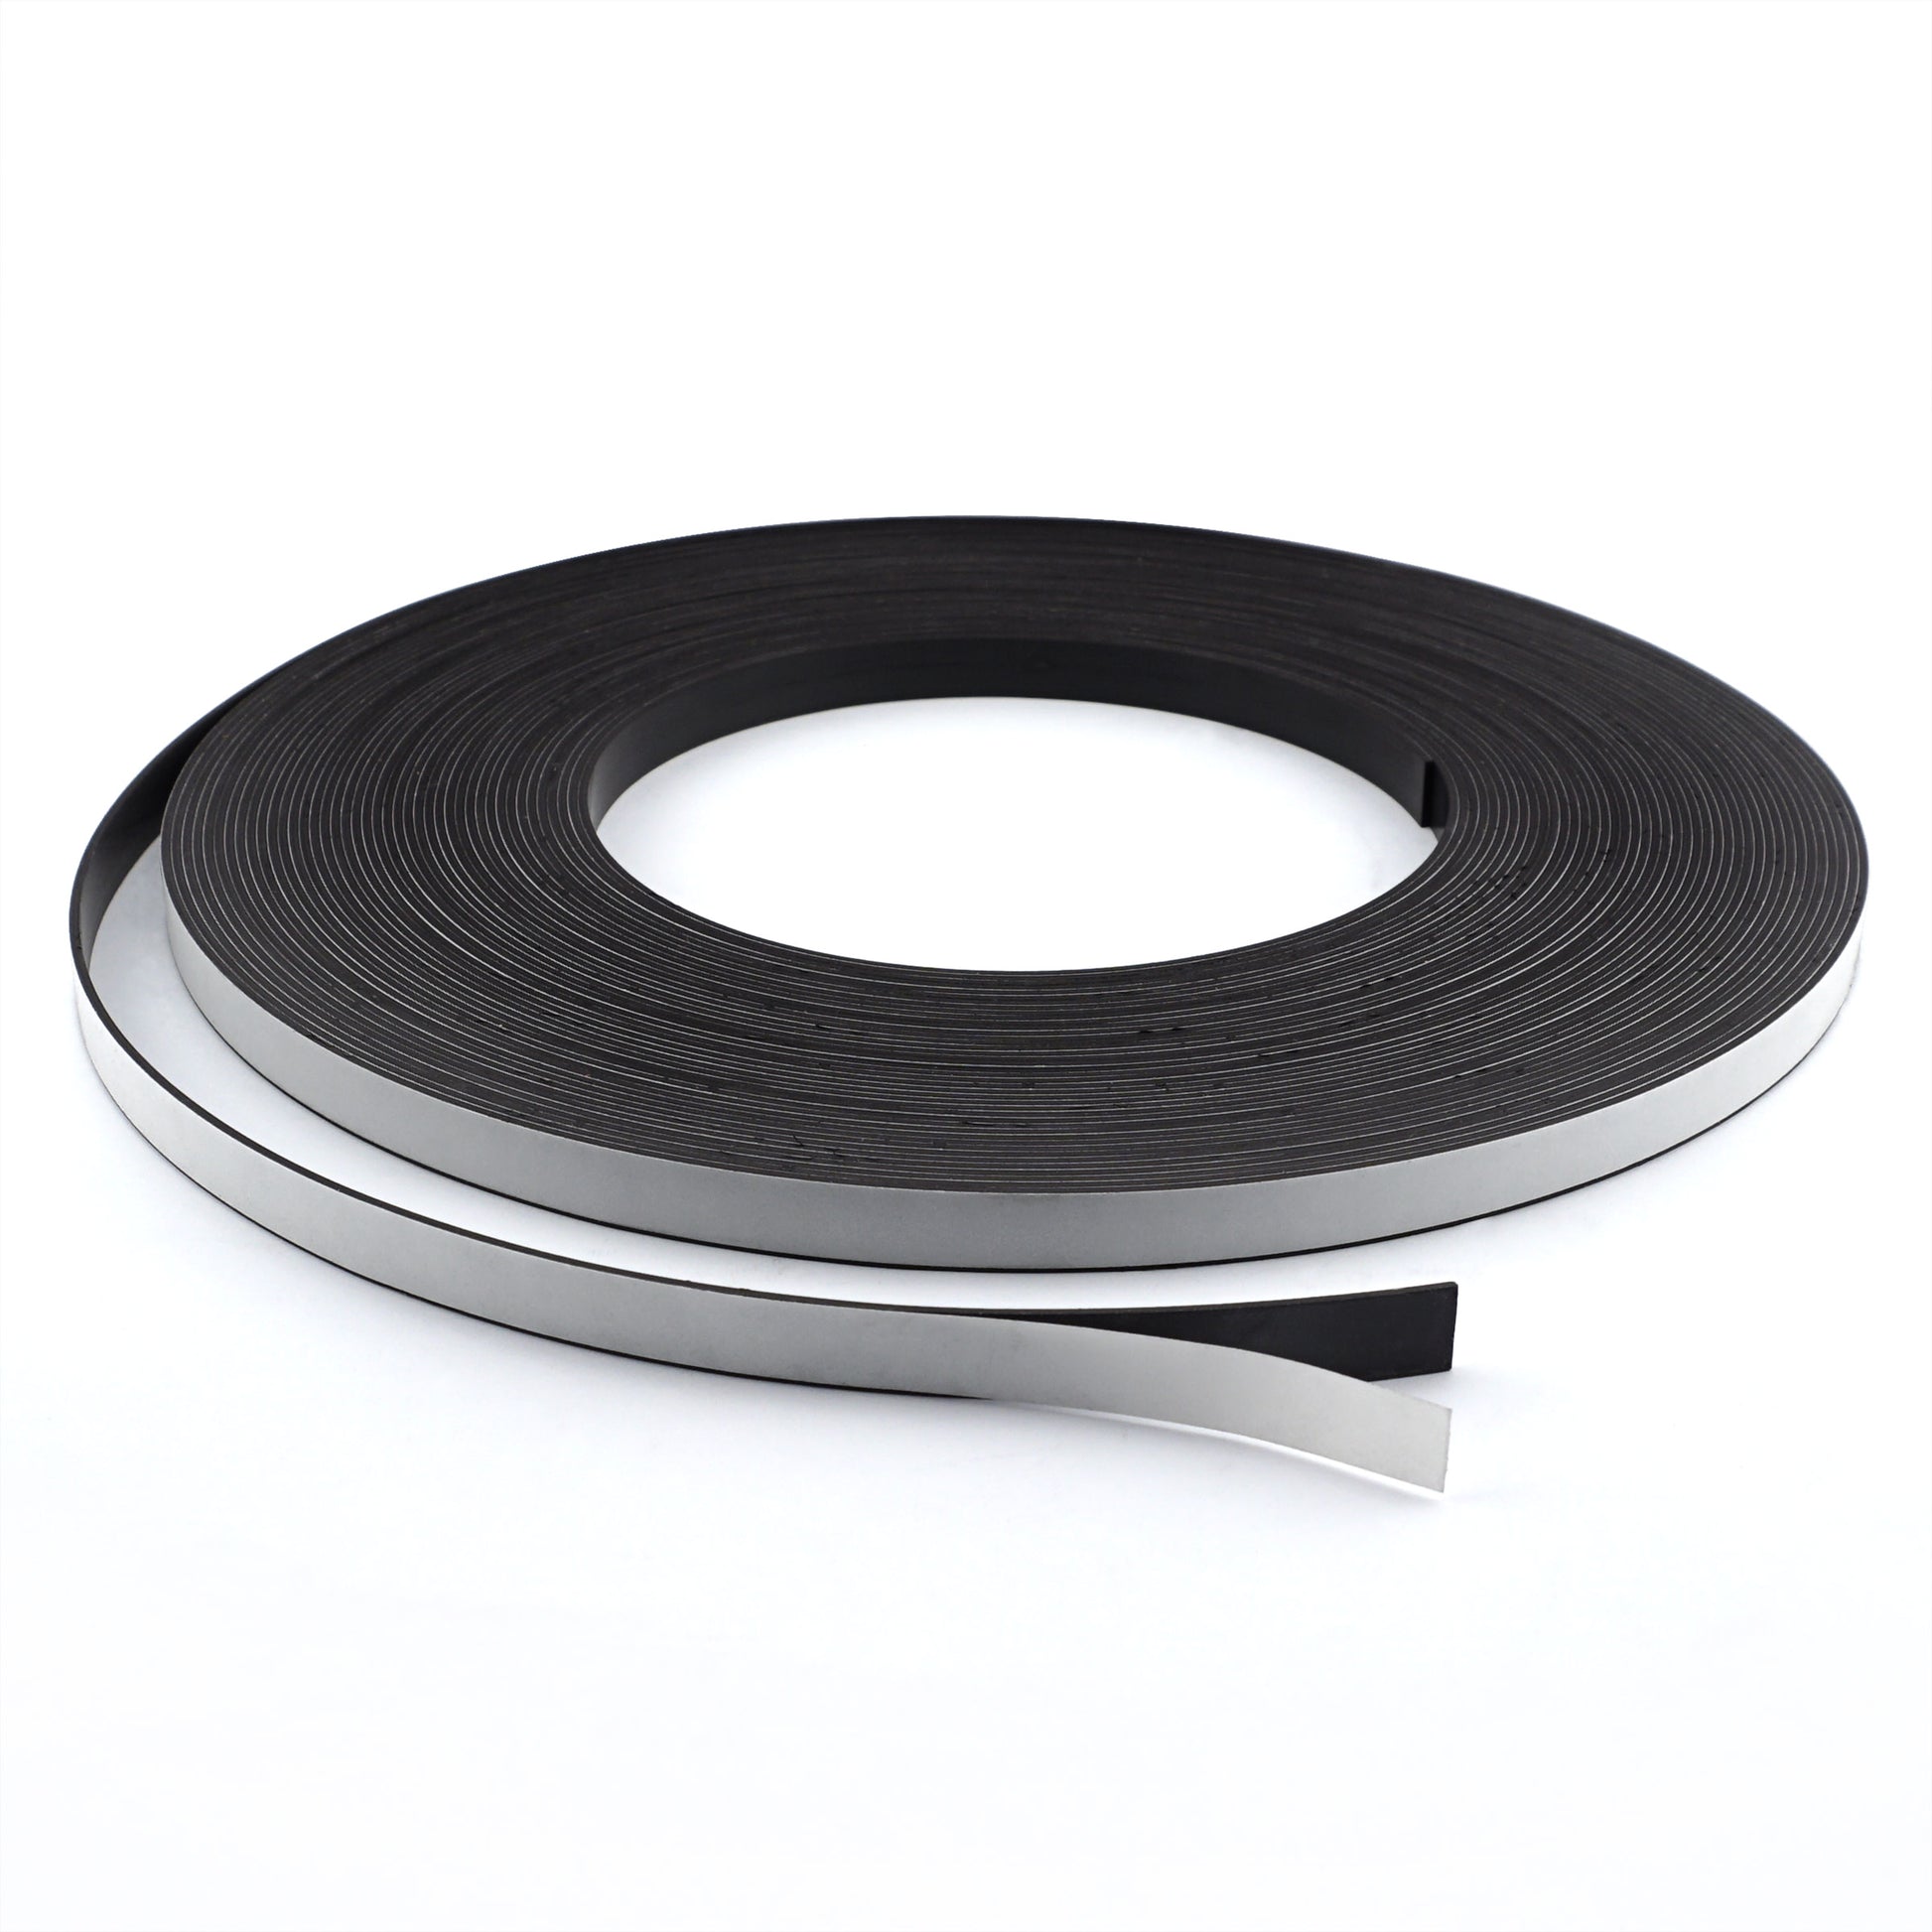 Load image into Gallery viewer, ZGN10HPAA Flexible Magnetic Strip with Adhesive - 45 Degree Angle View